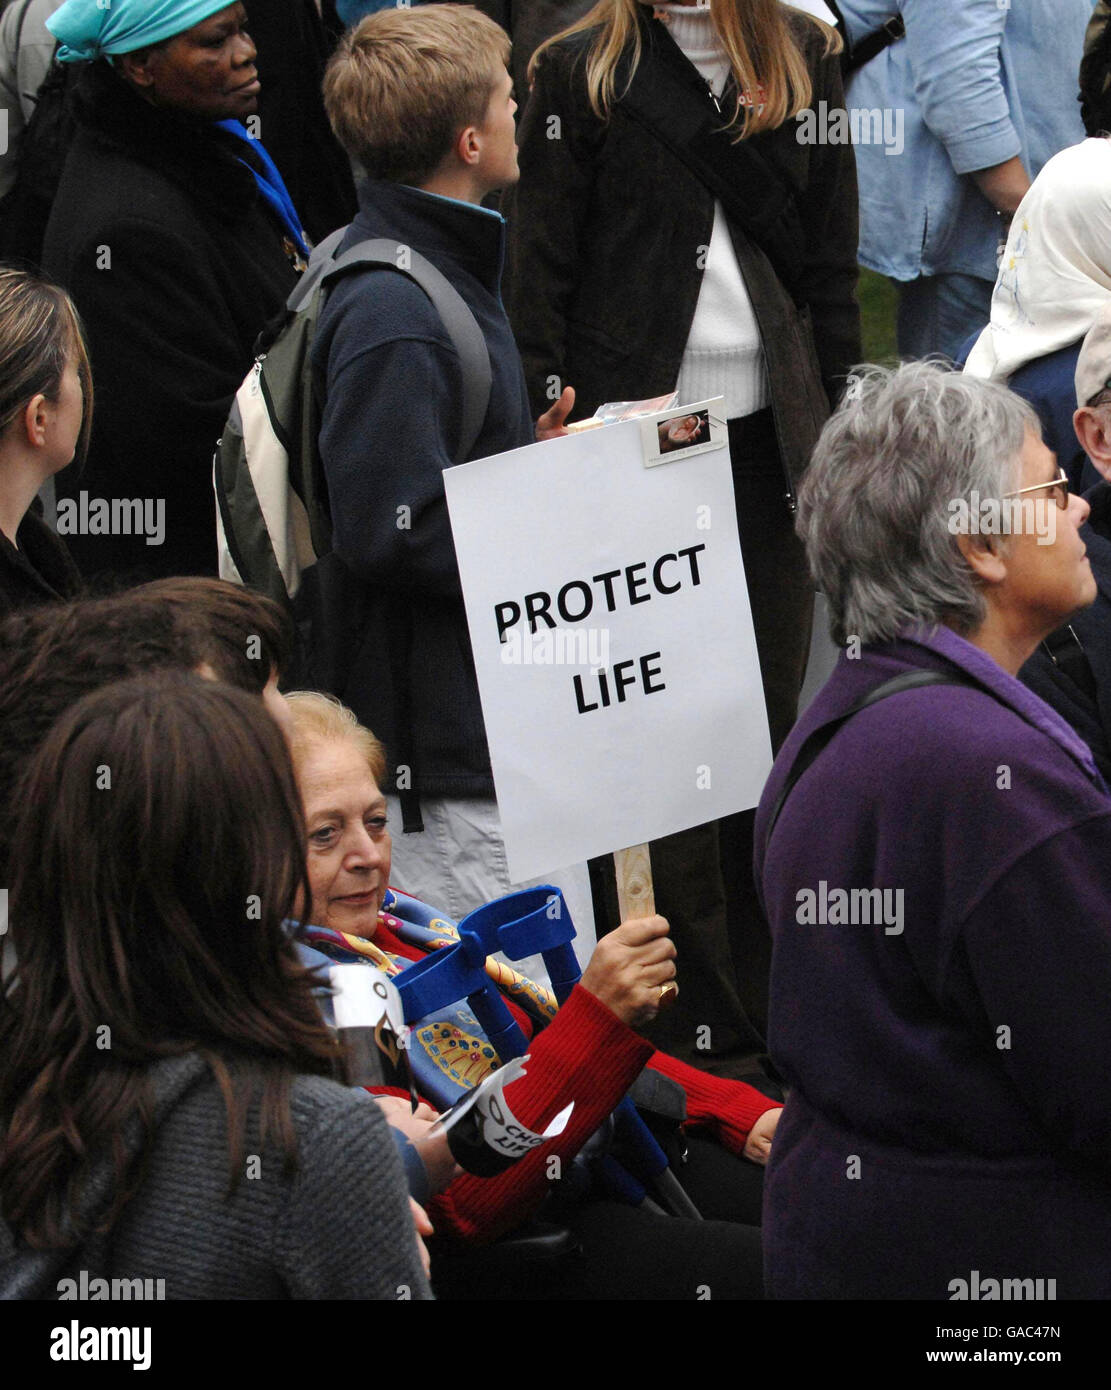 Anti-abortion activists demonstrate outside the Houses of Parliament in Westminster, London, to mark the 40th anniversary legalisation of abortion. Stock Photo